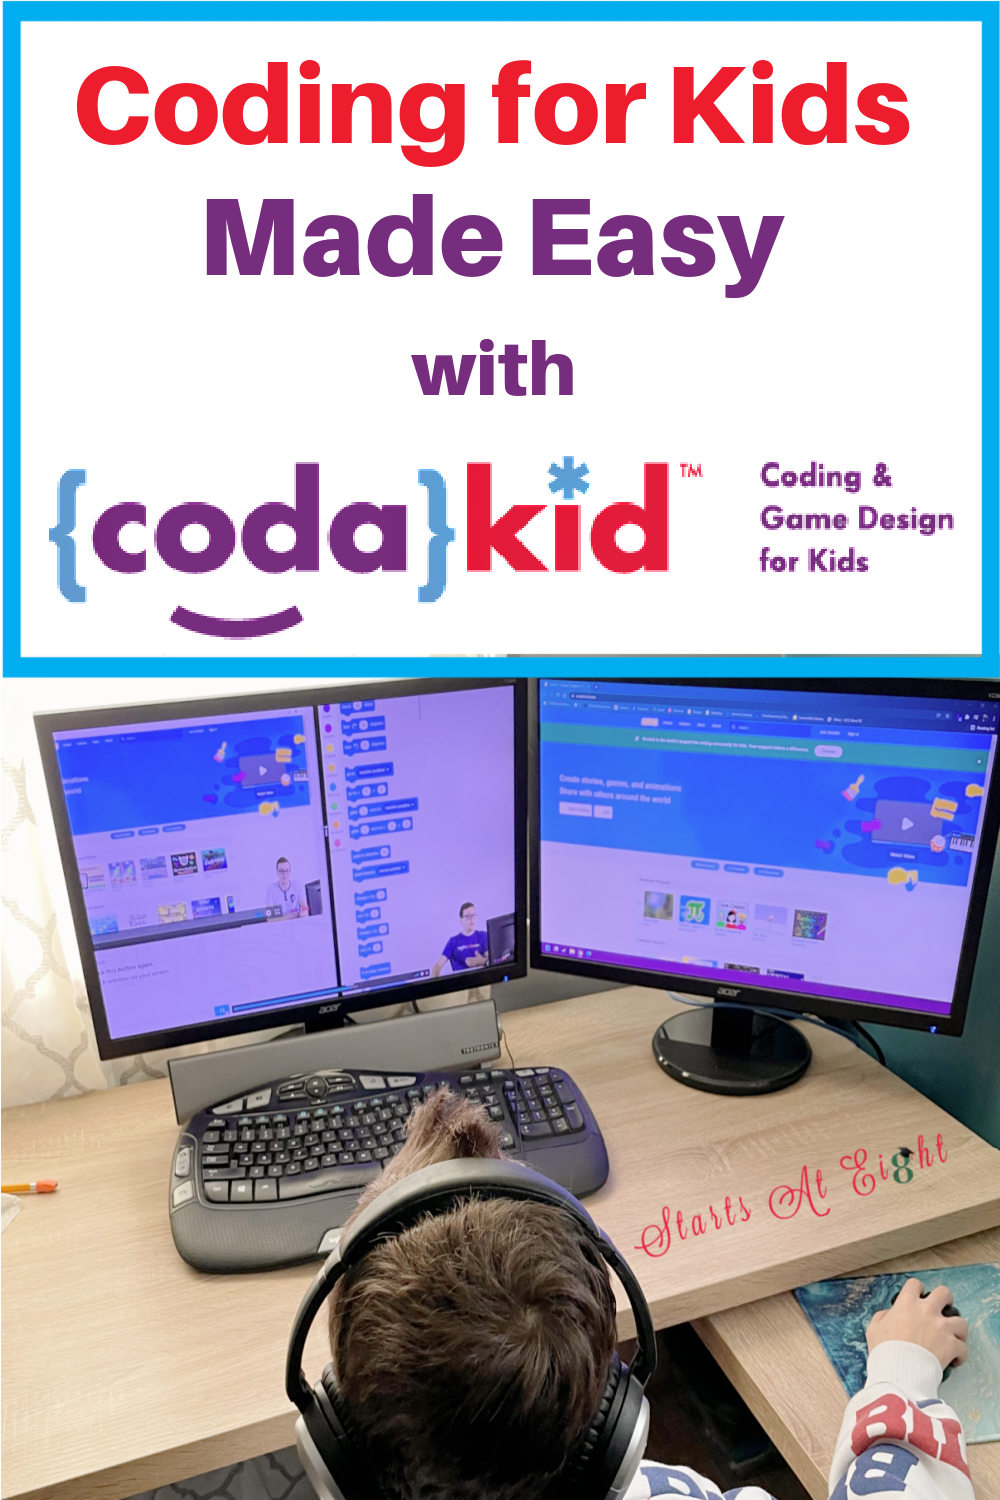 Coding for Kids with CodaKid is an easy way to help children gain important and necessary coding skills. Choose from self-paced courses or 1on1 private tutoring. A review from Starts At Eight